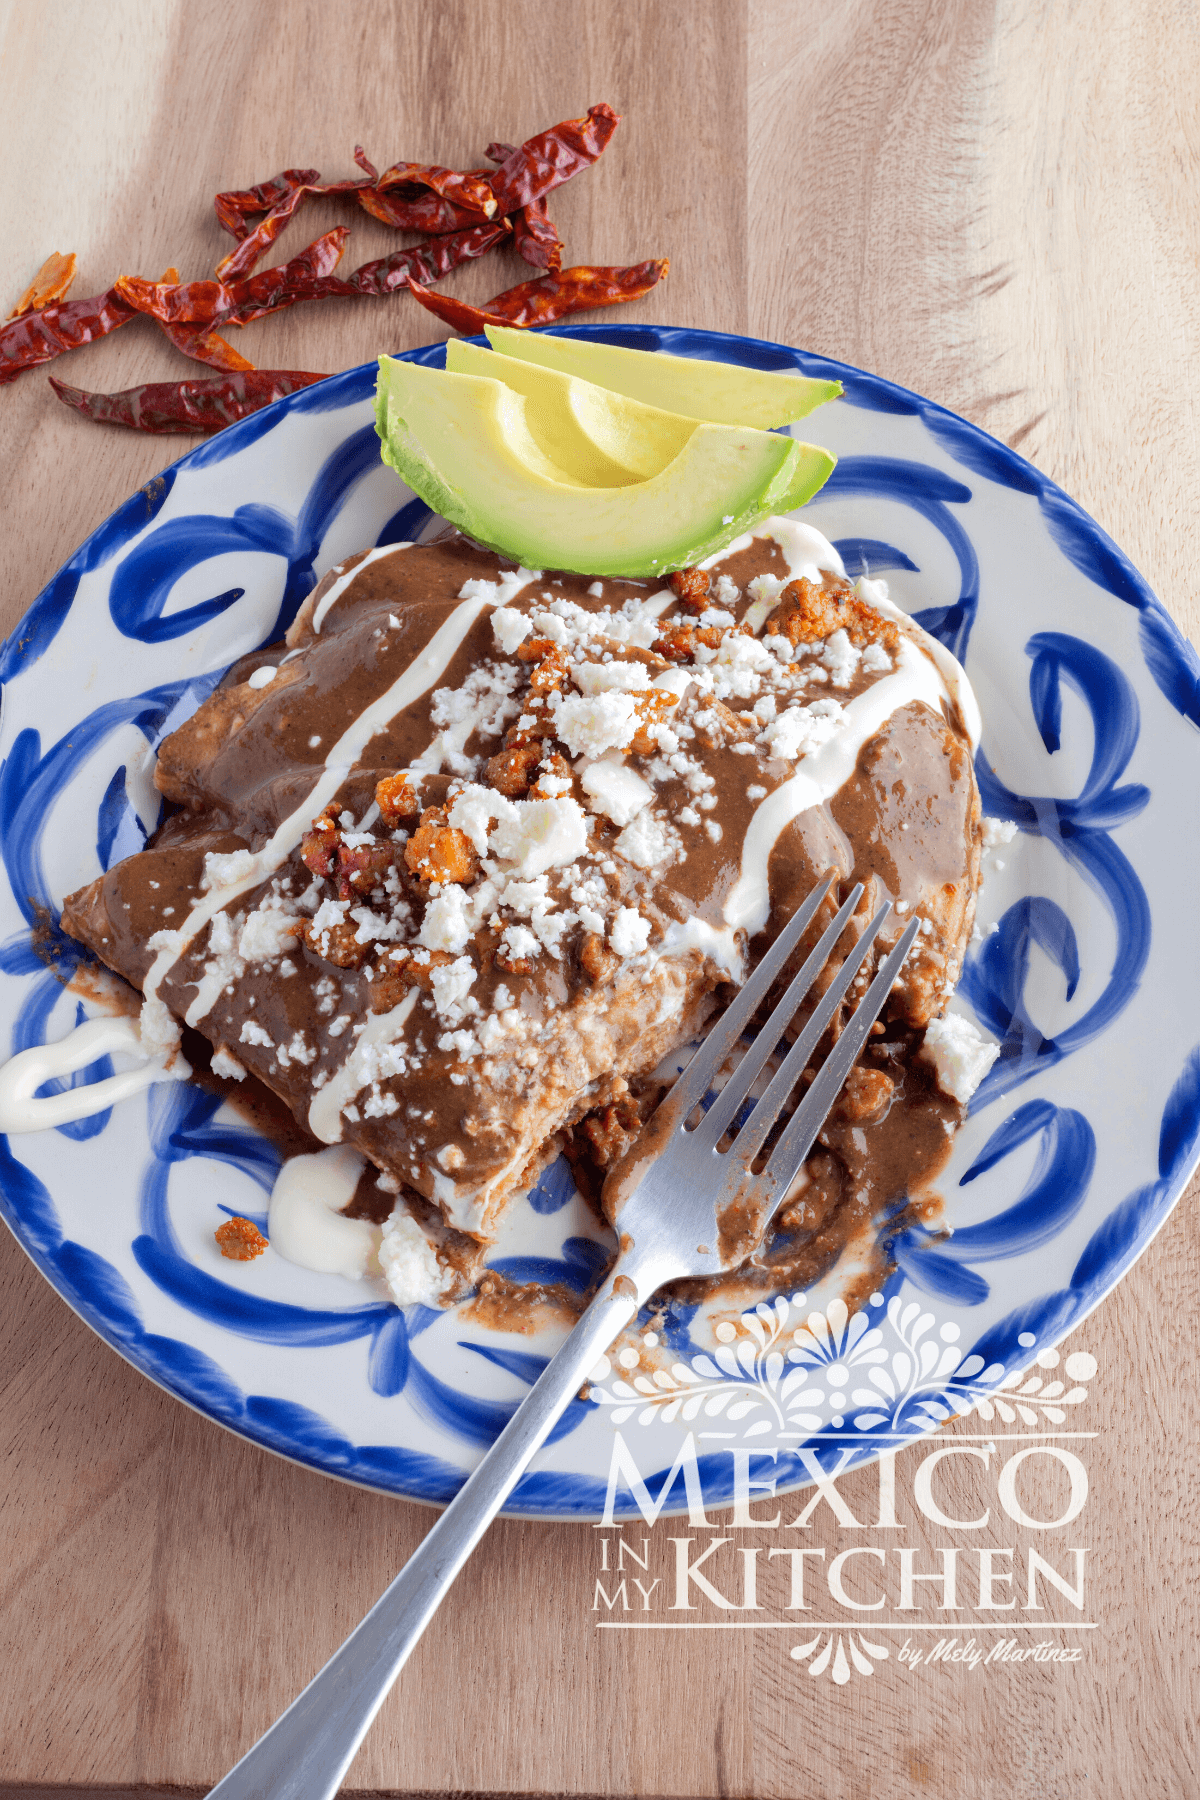 Enfrijoladas served in a plate, topped with Mexican crema, queso fresco and avocado slices.